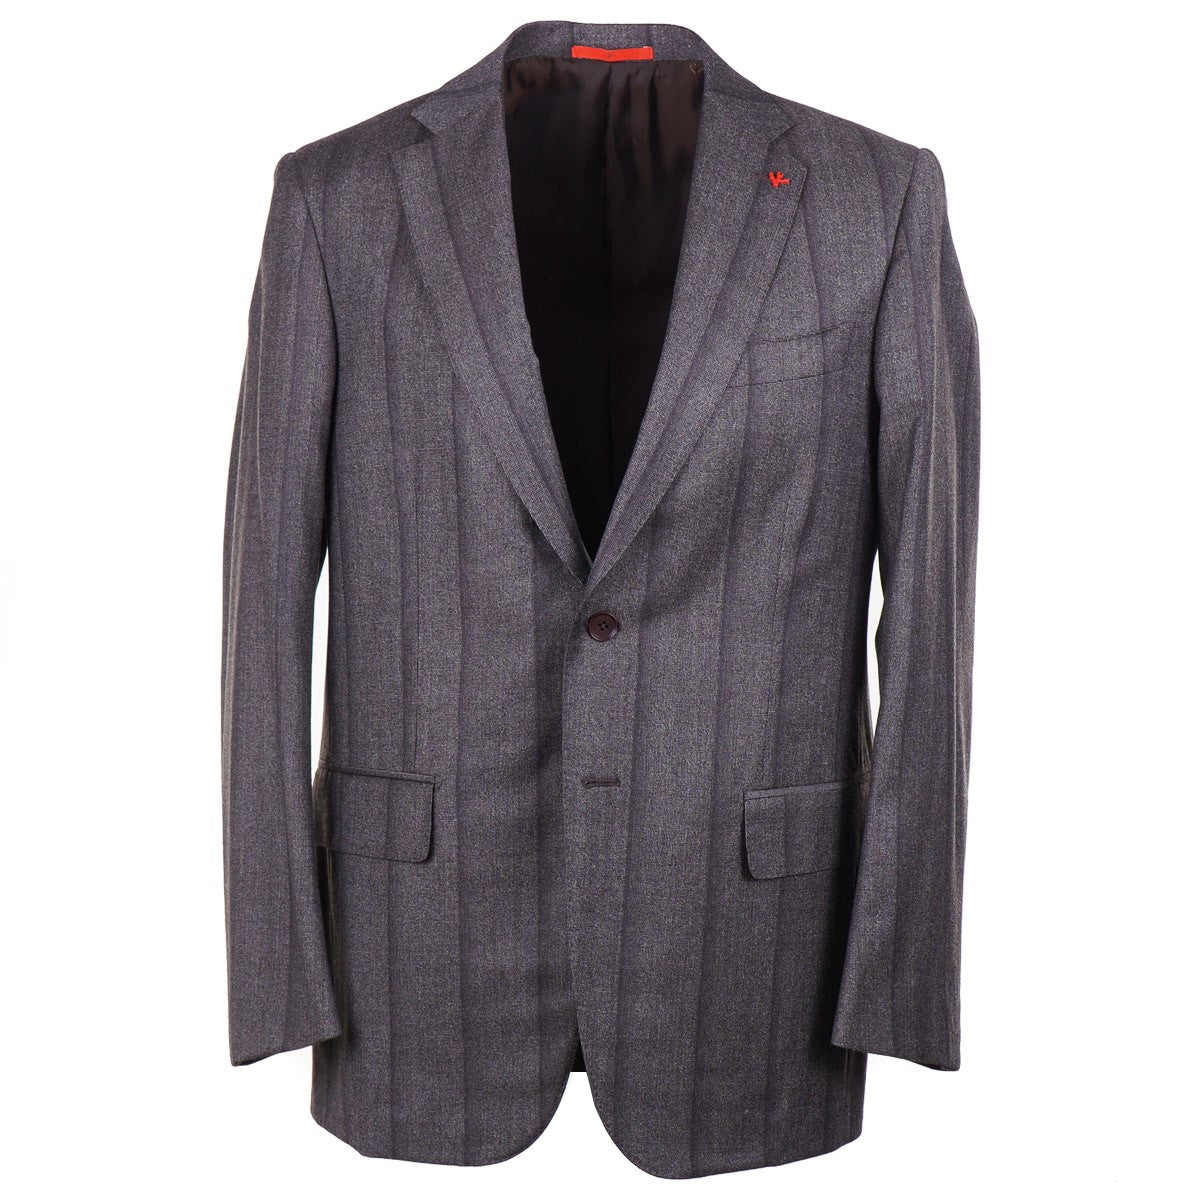 Isaia Shadow Striped Wool Suit - Top Shelf Apparel